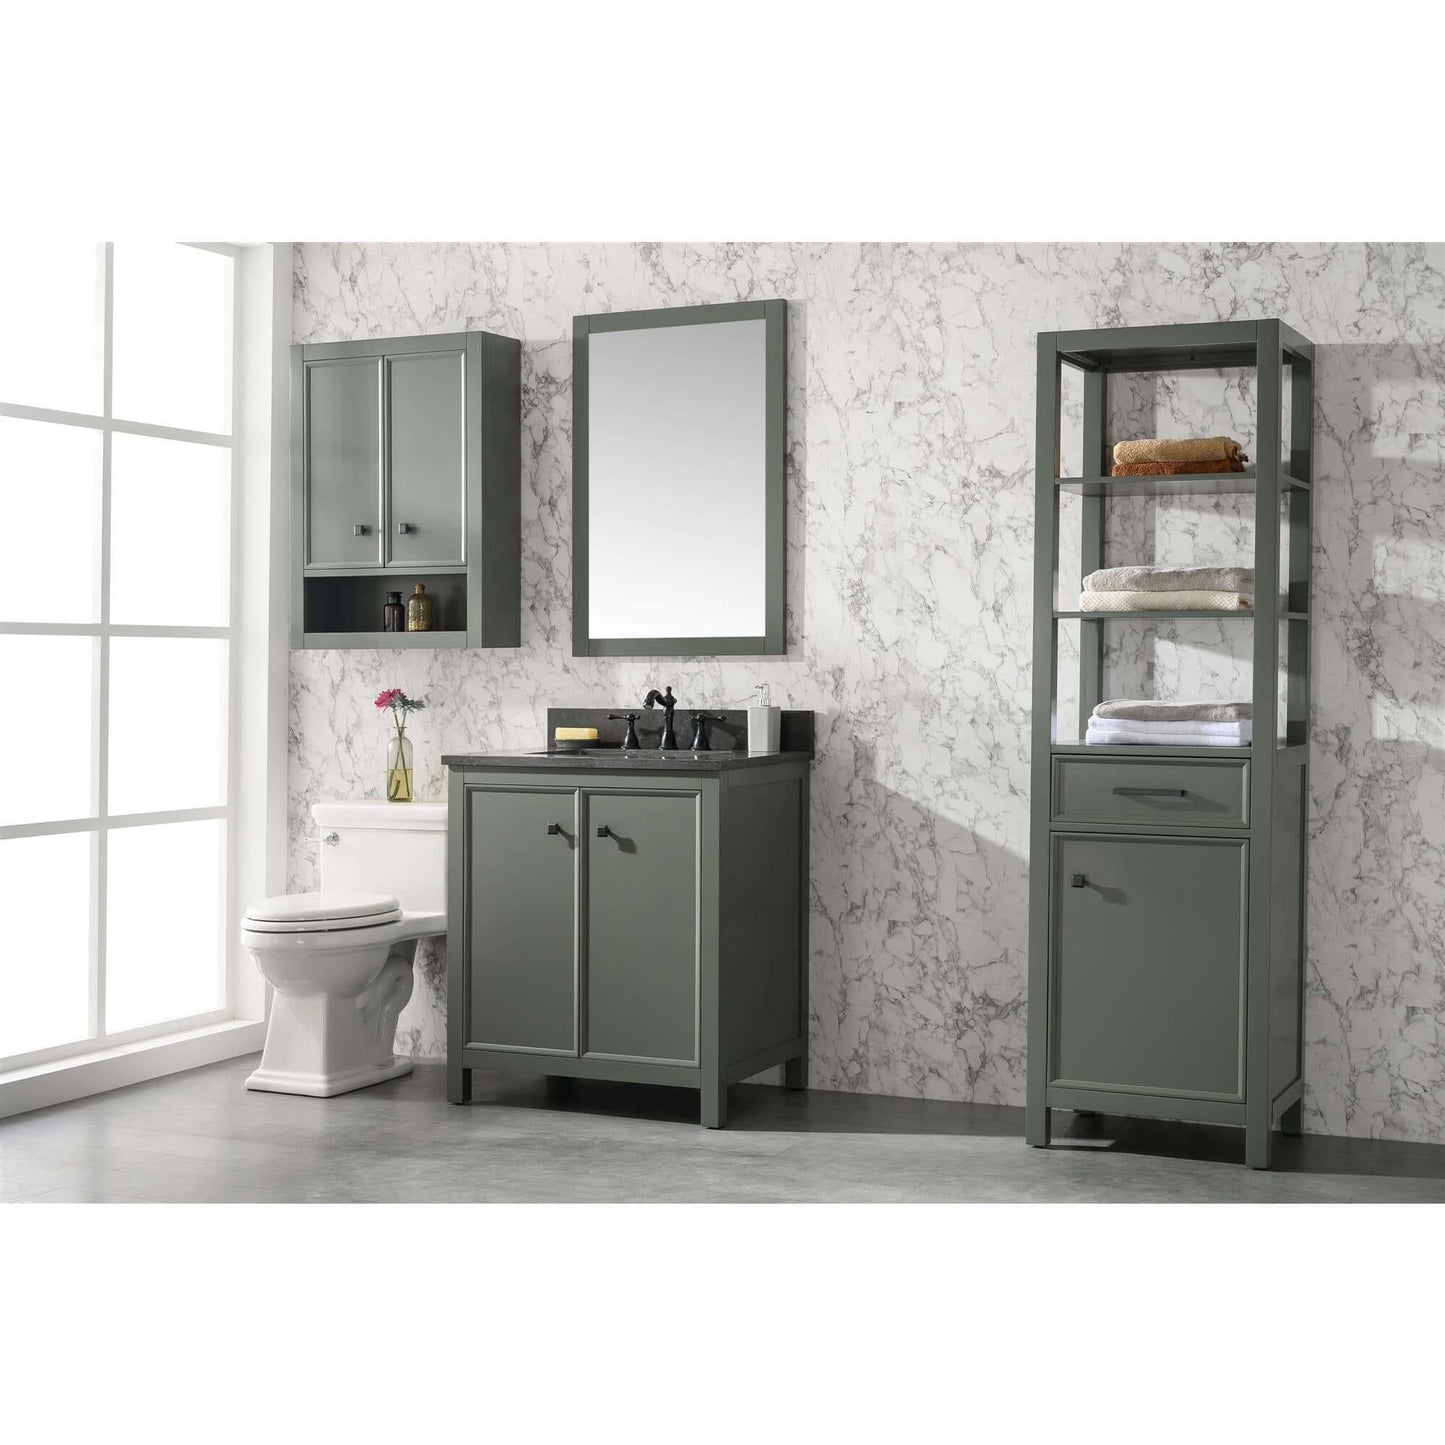 30" Pewter Green Finish Sink Vanity Cabinet With Blue Lime Stone Top - WLF2130-PG